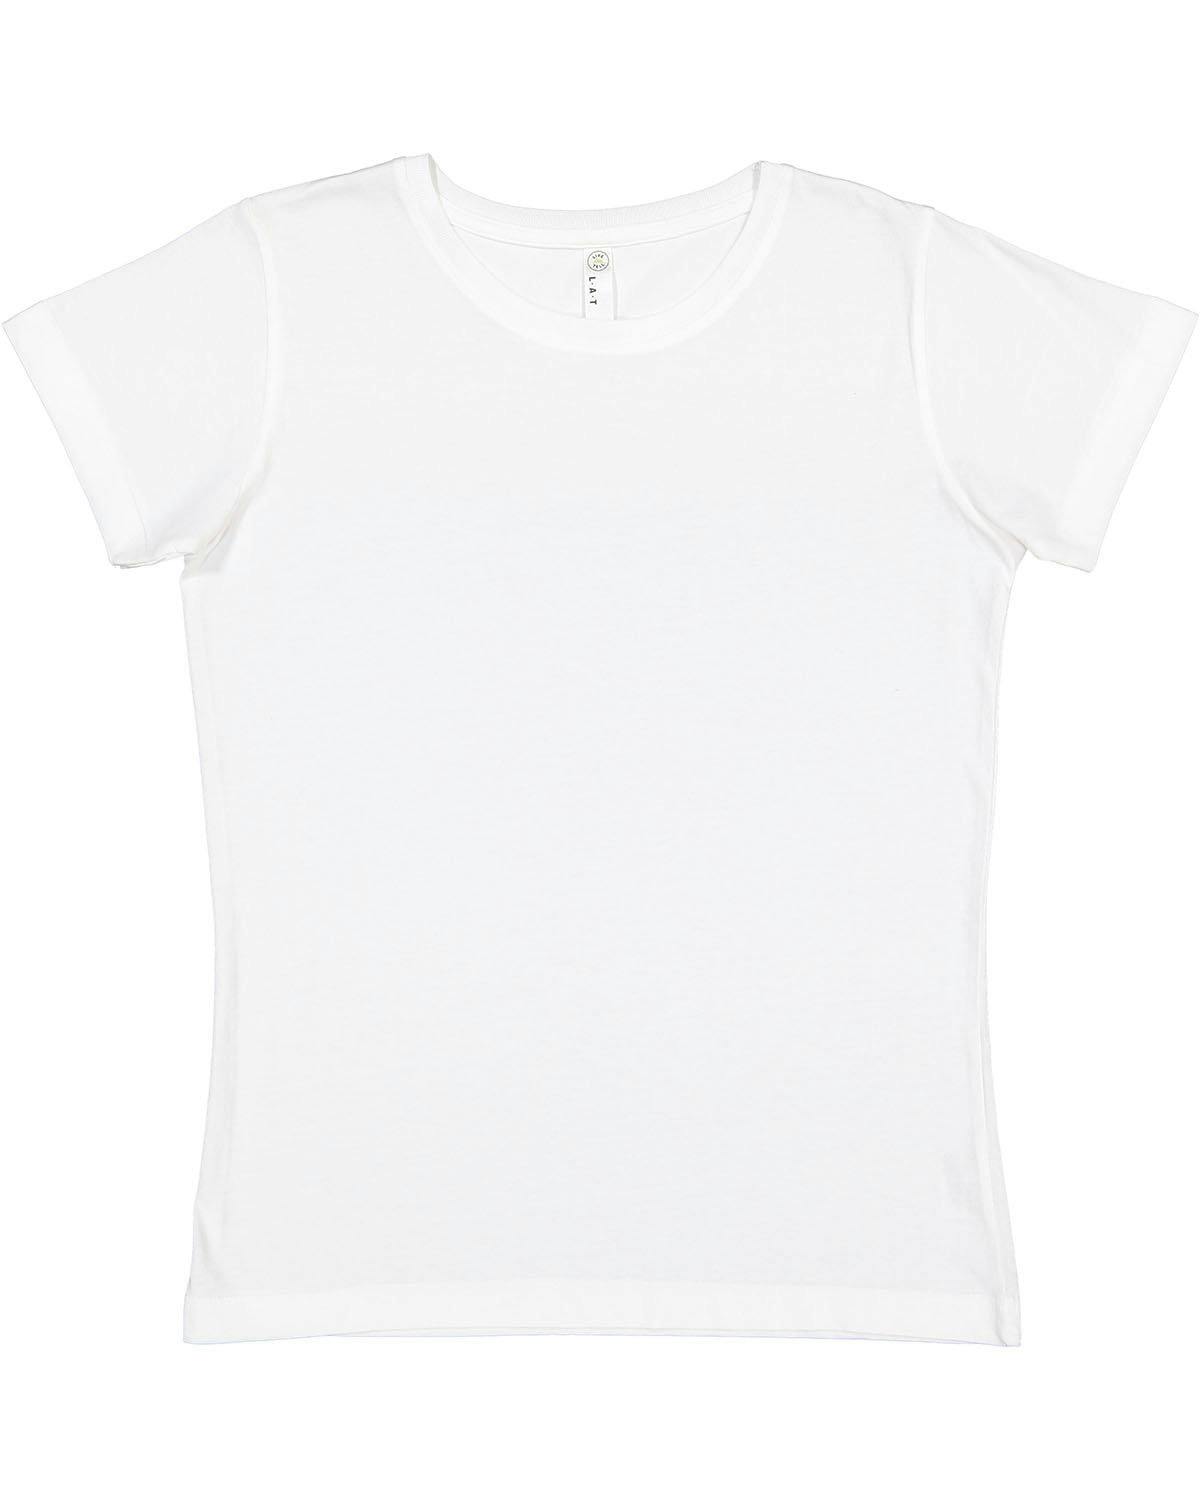 Image for Ladies' Fine Jersey T-Shirt